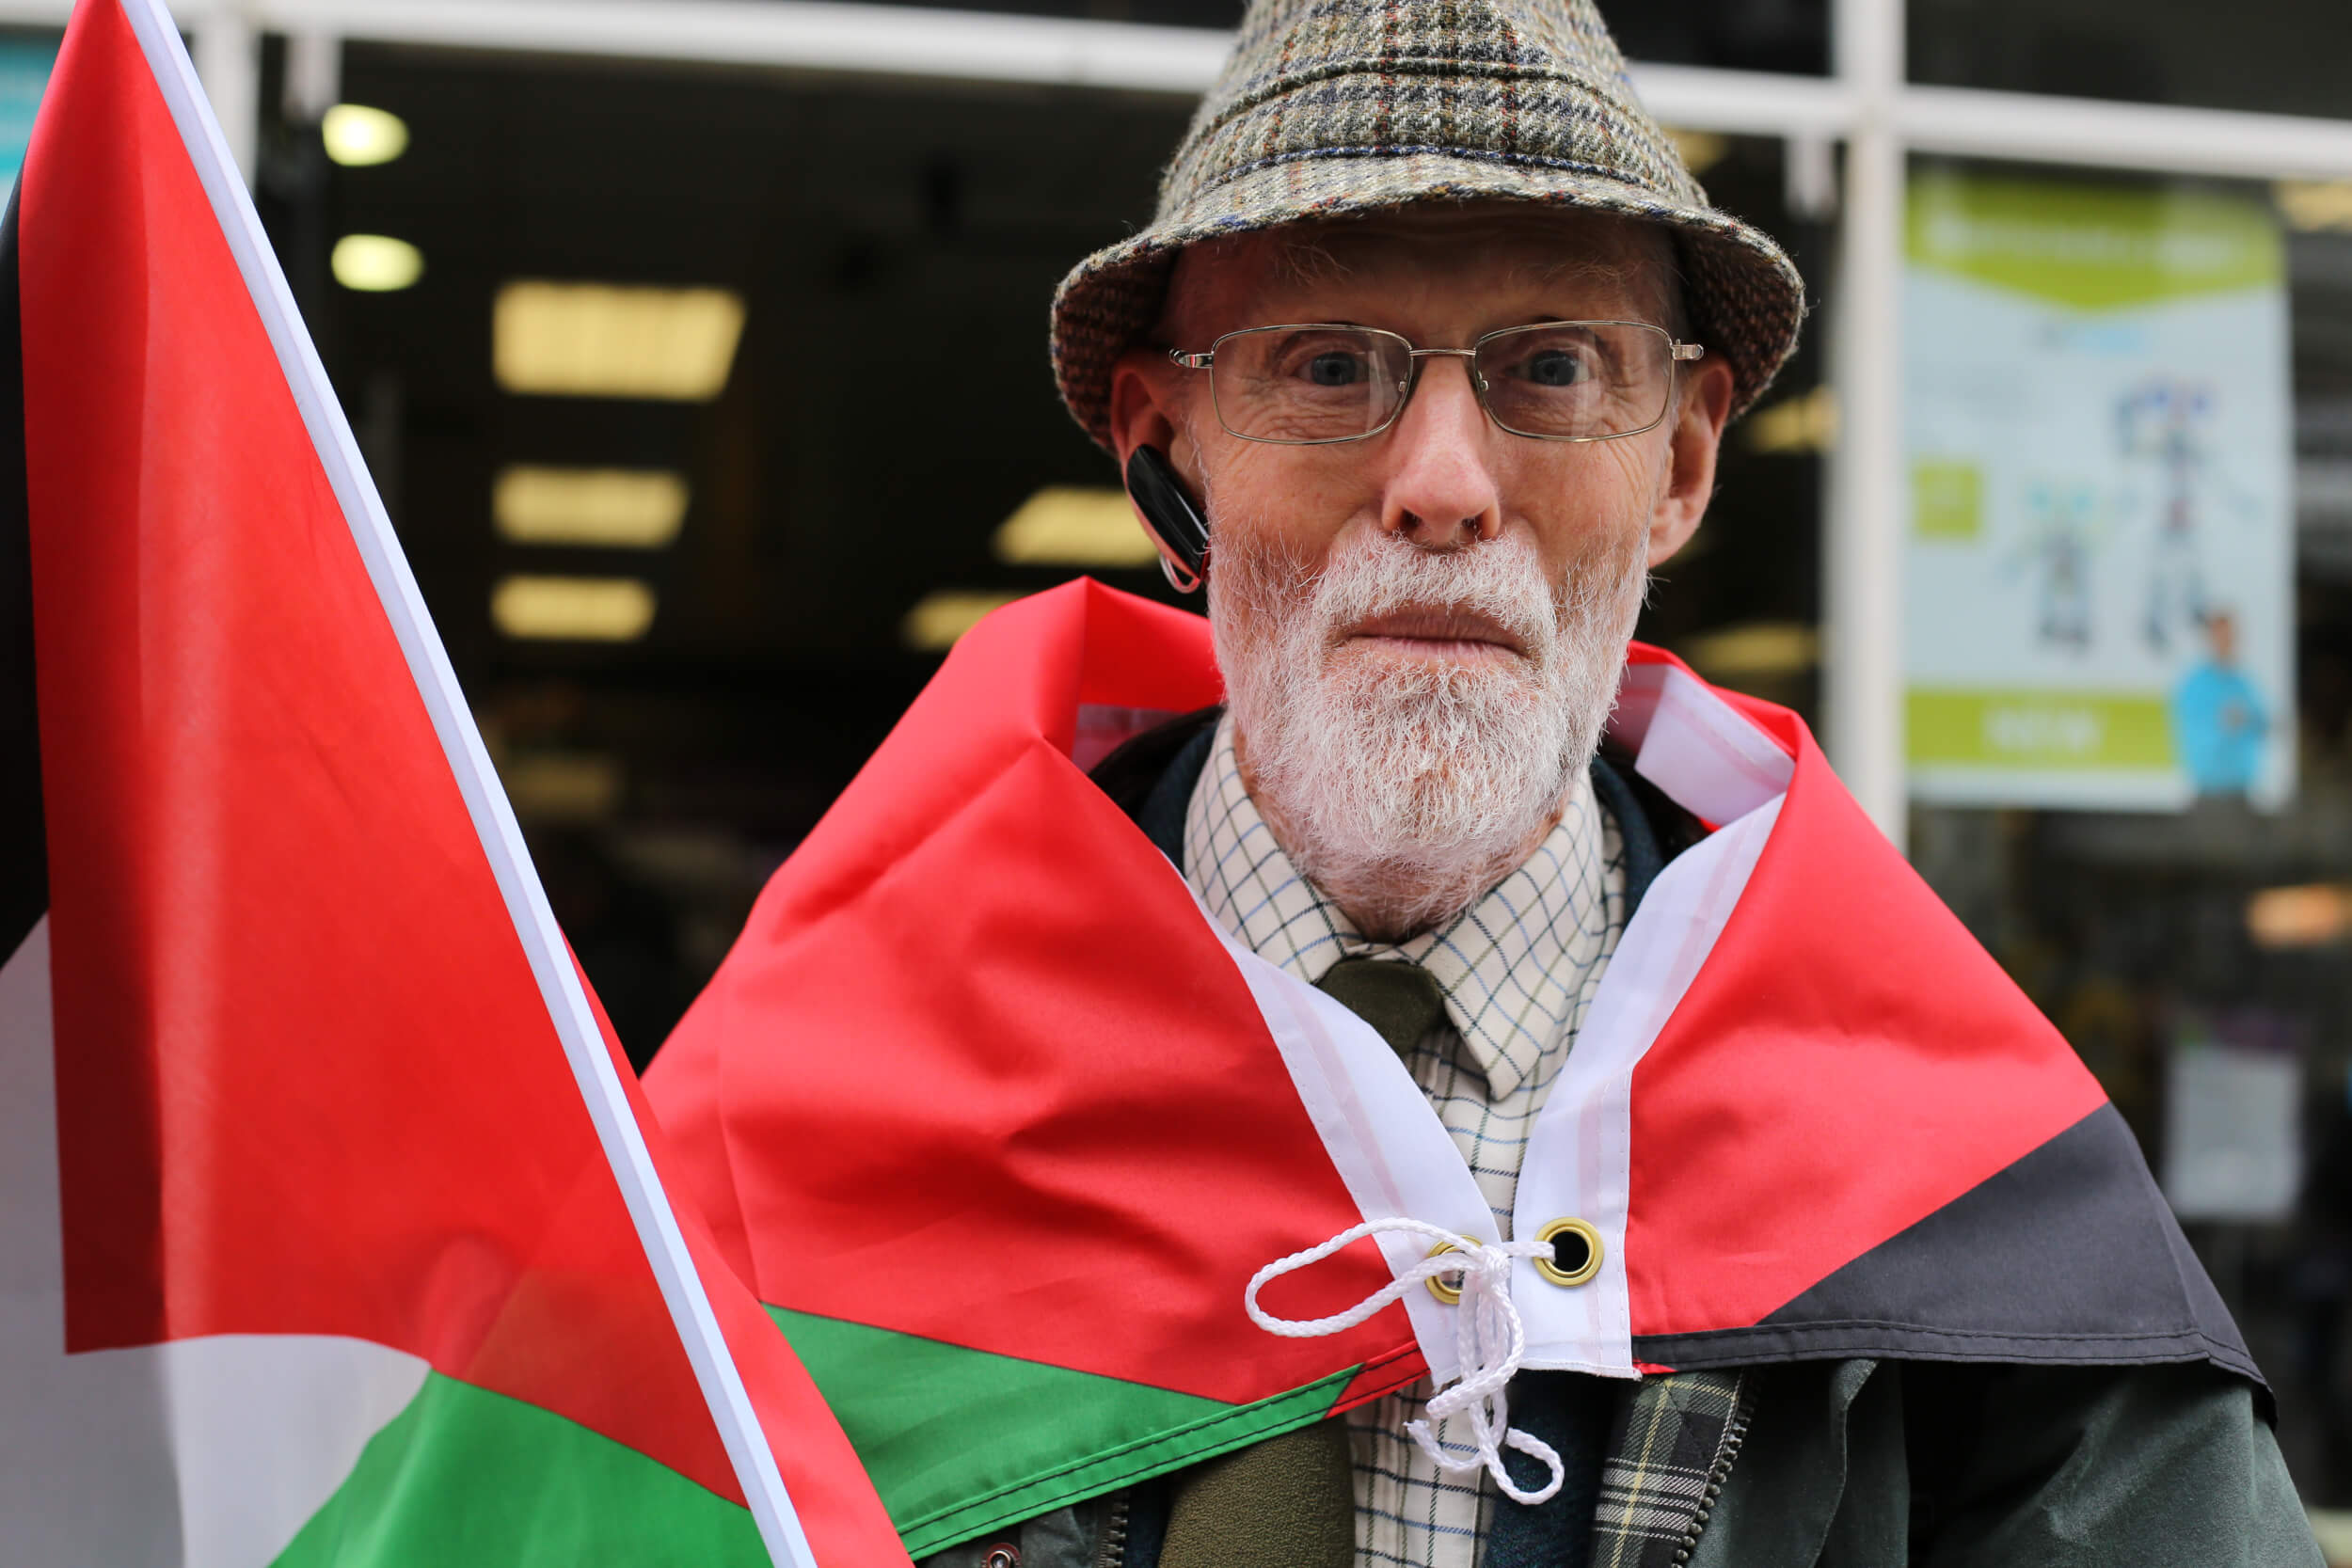 Two flags are better than one. Support for Palestine is growing among all sectors of society in the UK. (Photo: Sara Anna)